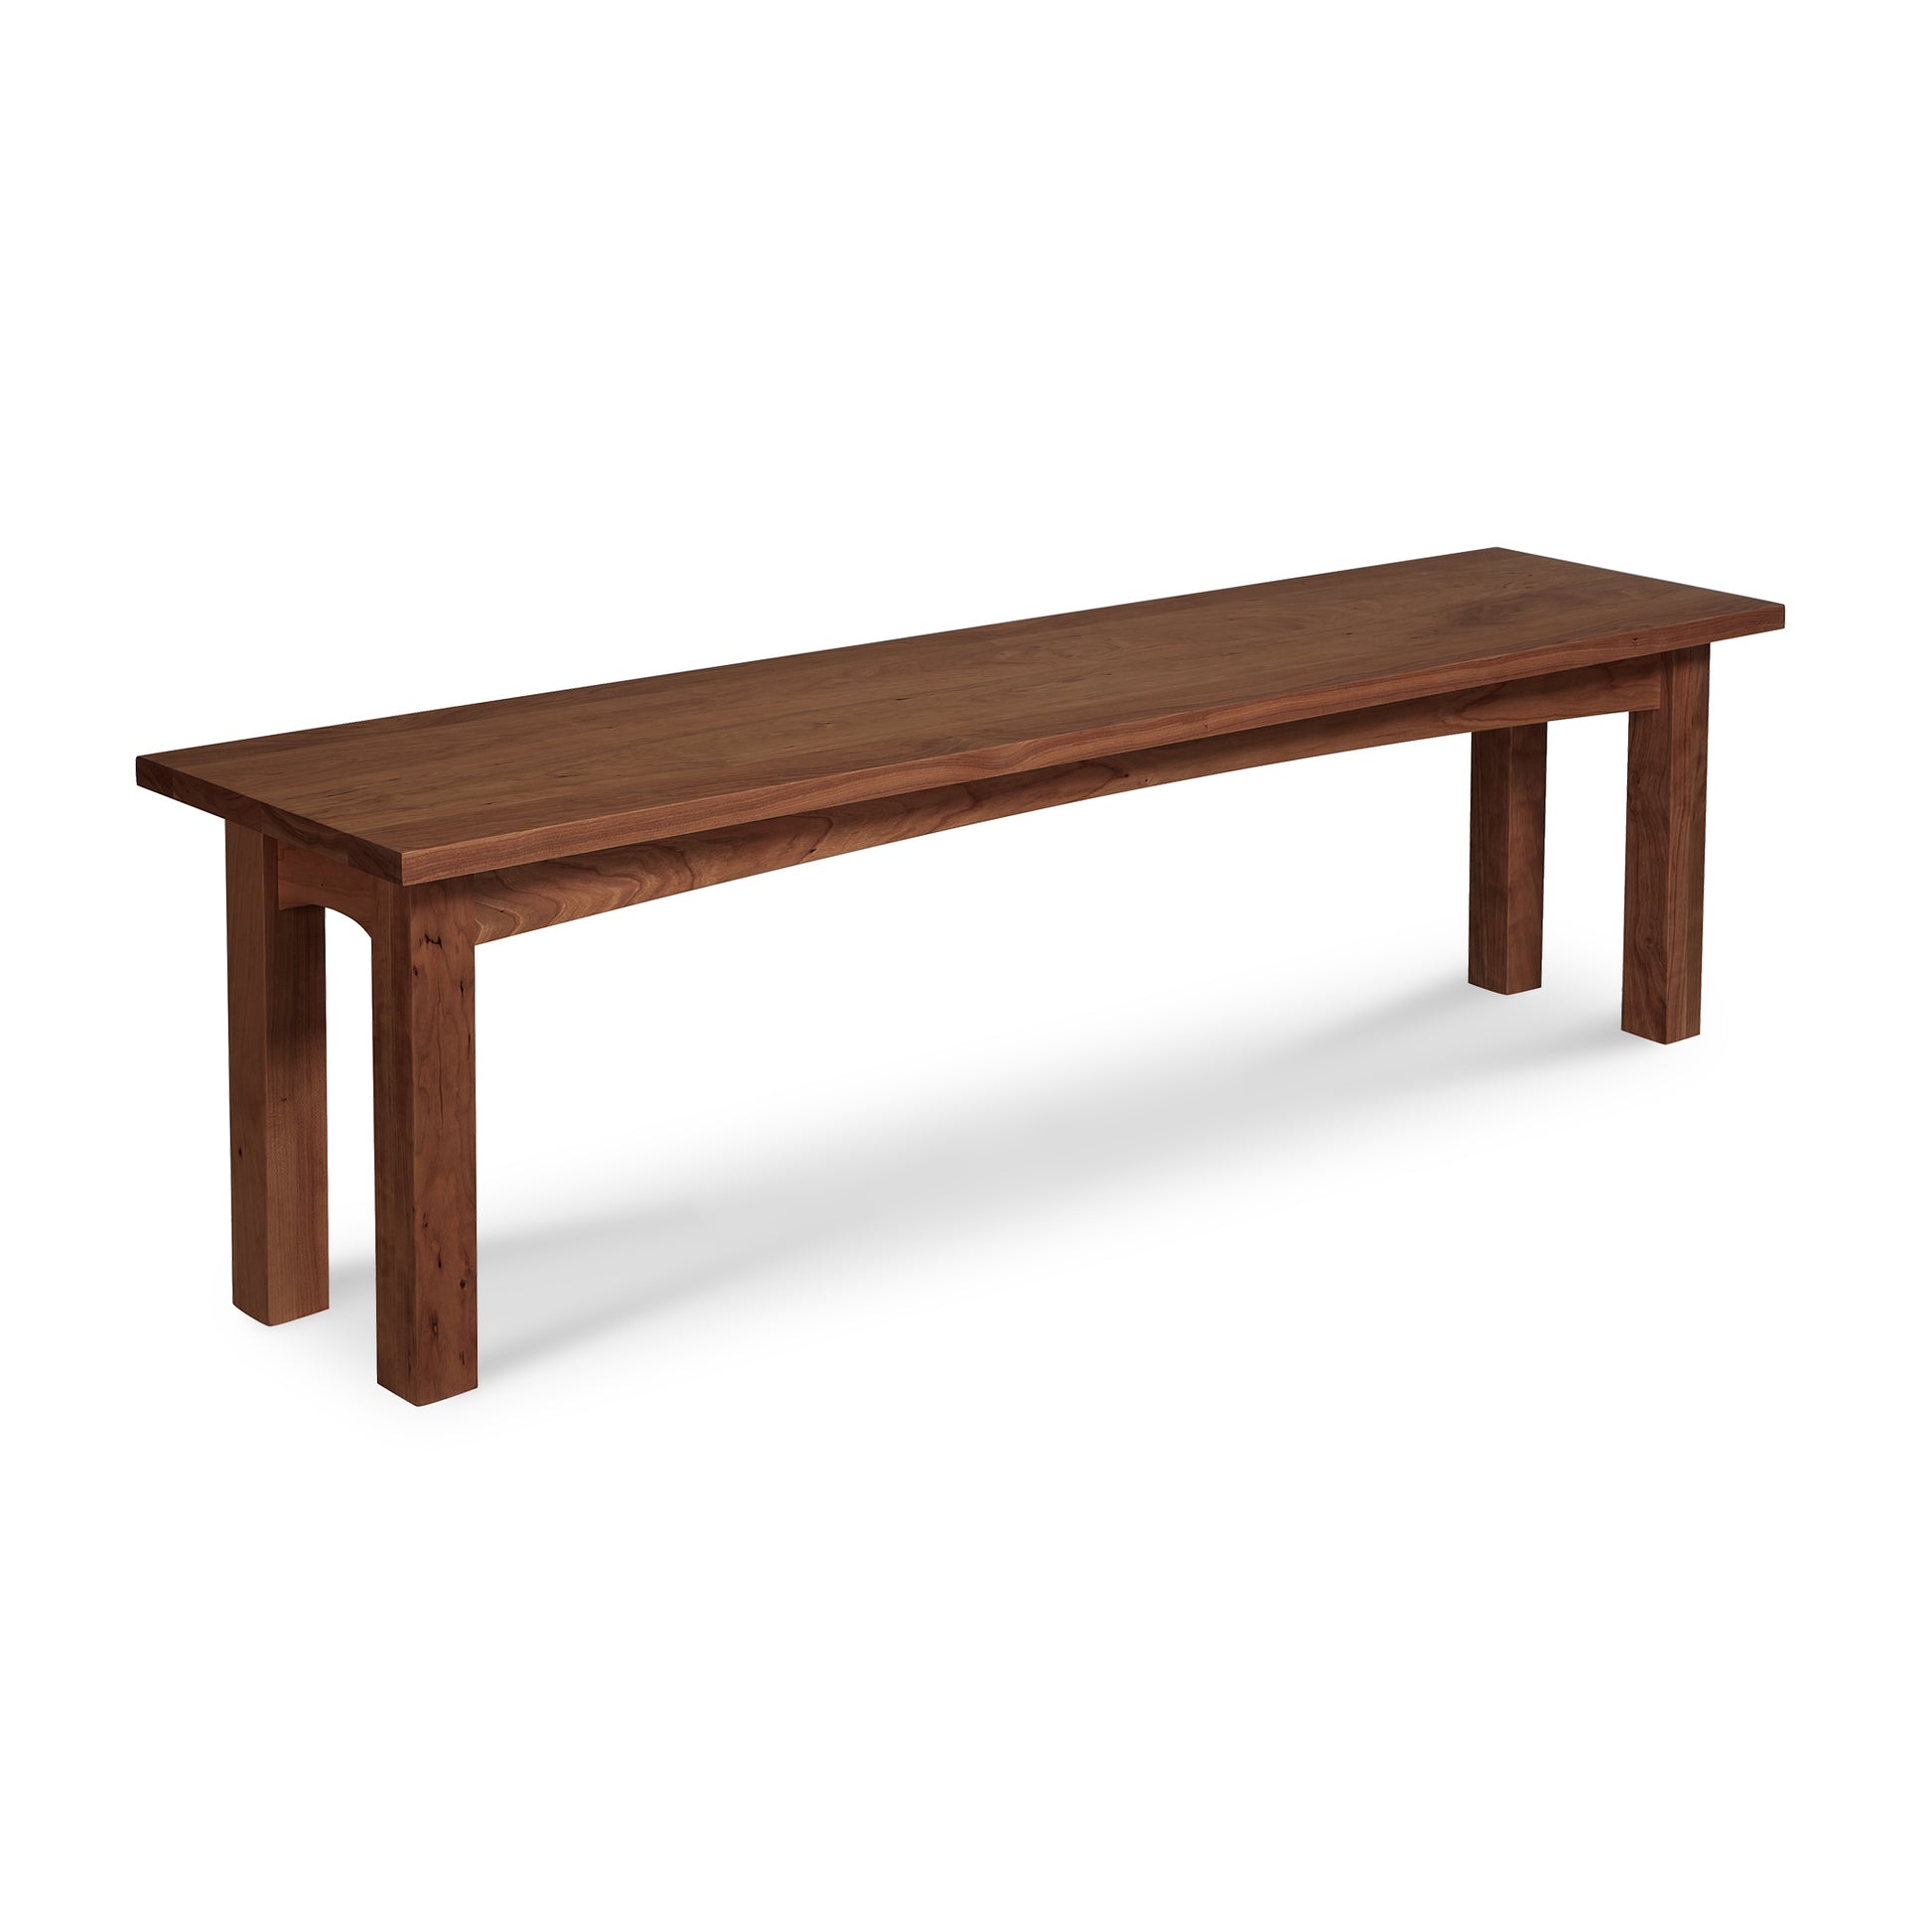 A simple Burlington Shaker Bench from Vermont Furniture Designs, with a rectangular top and four square legs, isolated on a white background.